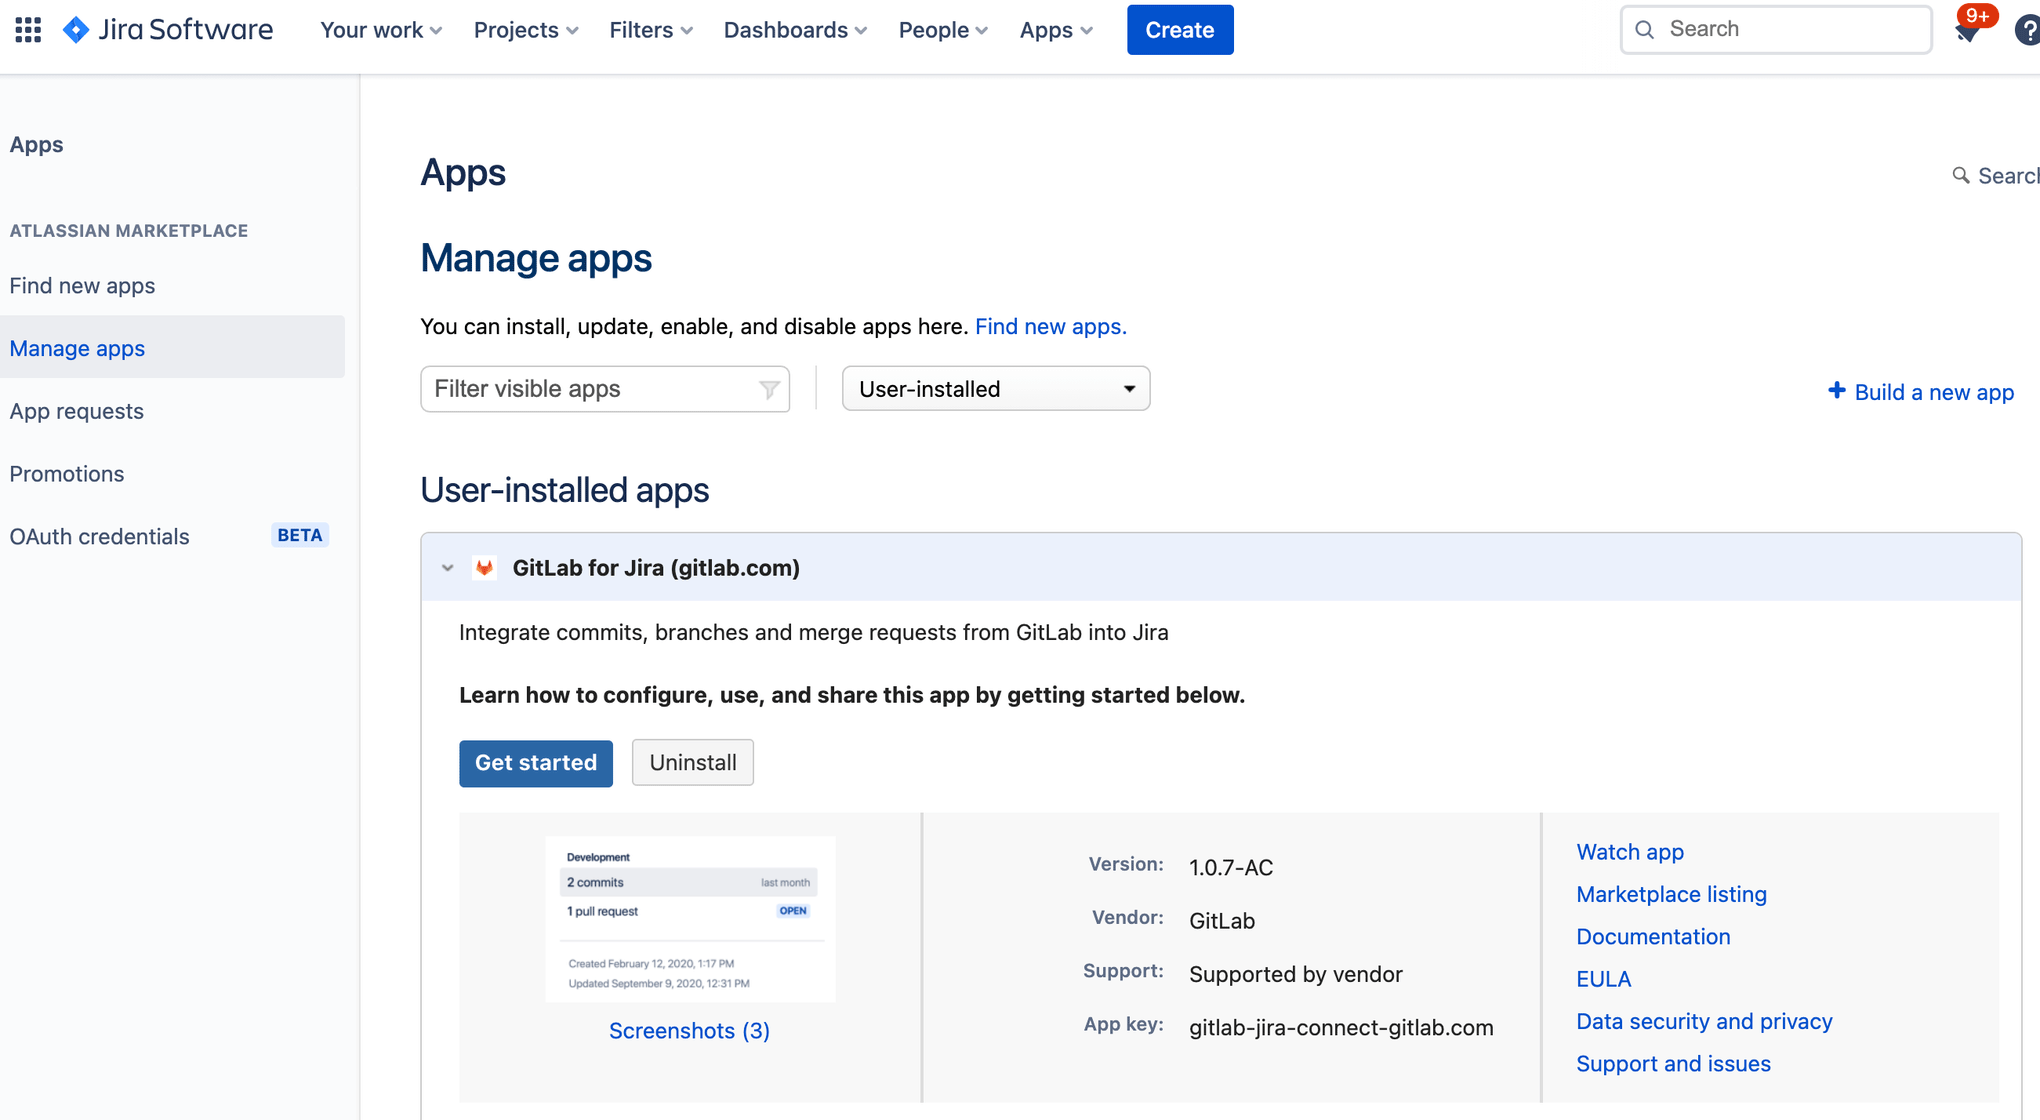 Expand Gitlab when on the Manage Apps screen in Jira Software